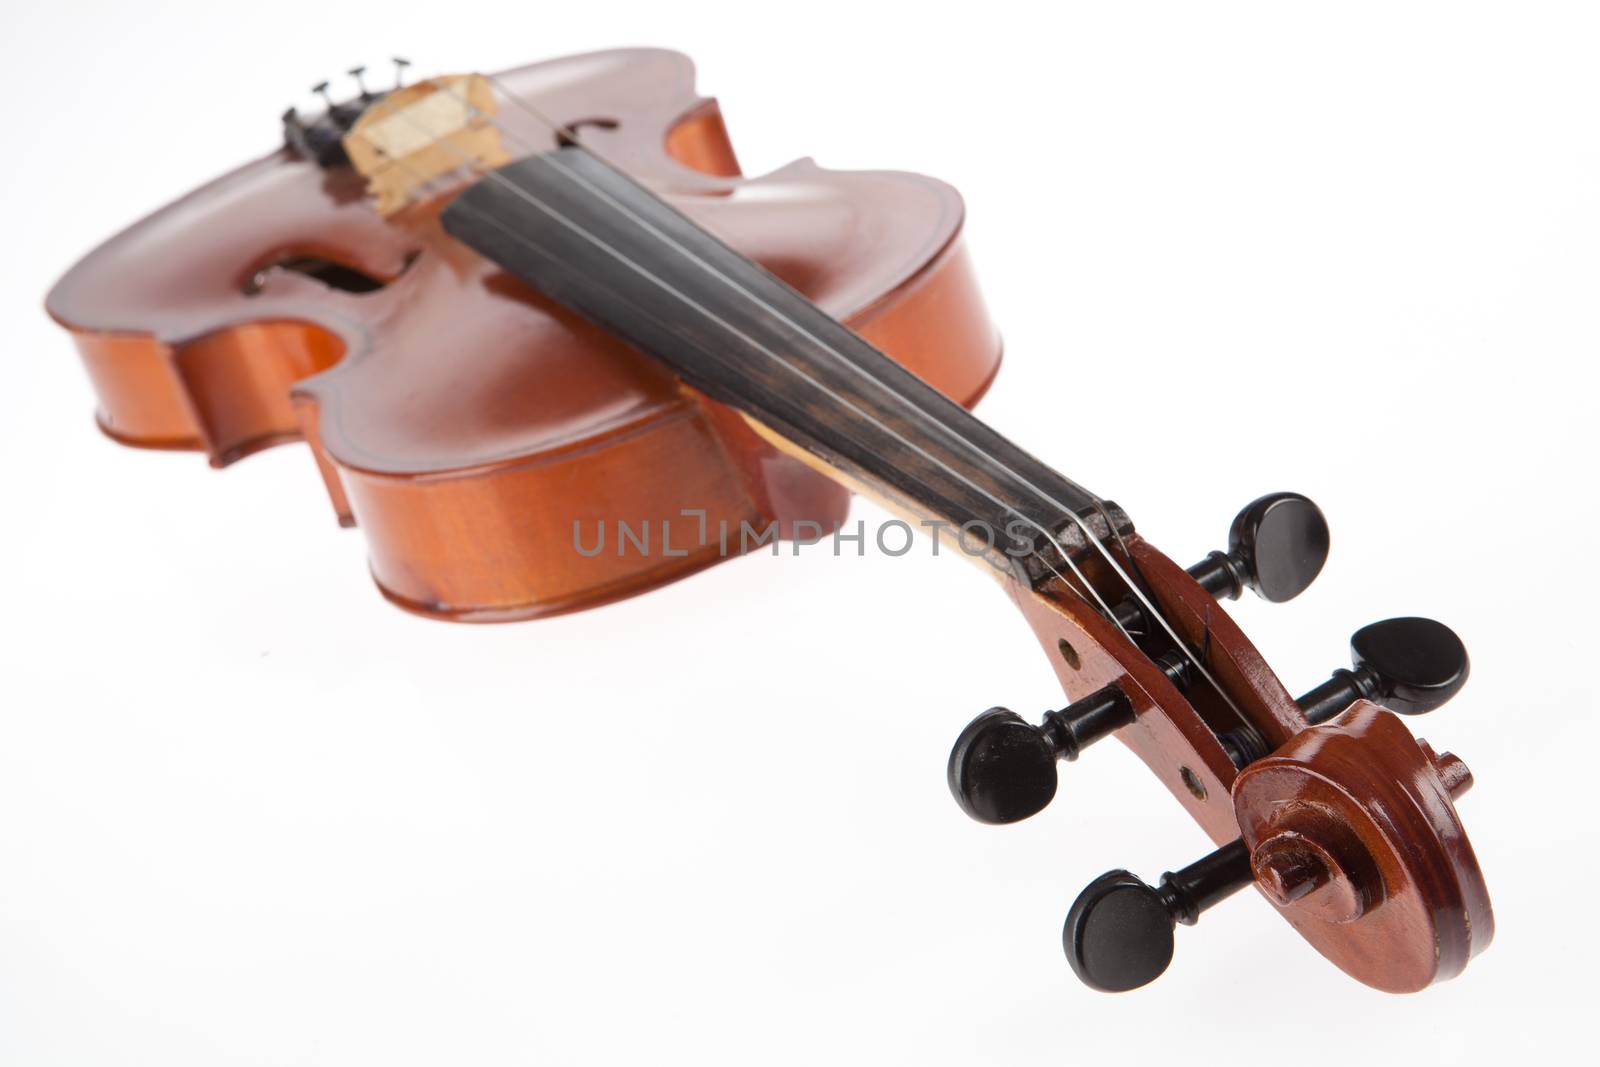 Old violin on isolated studio background